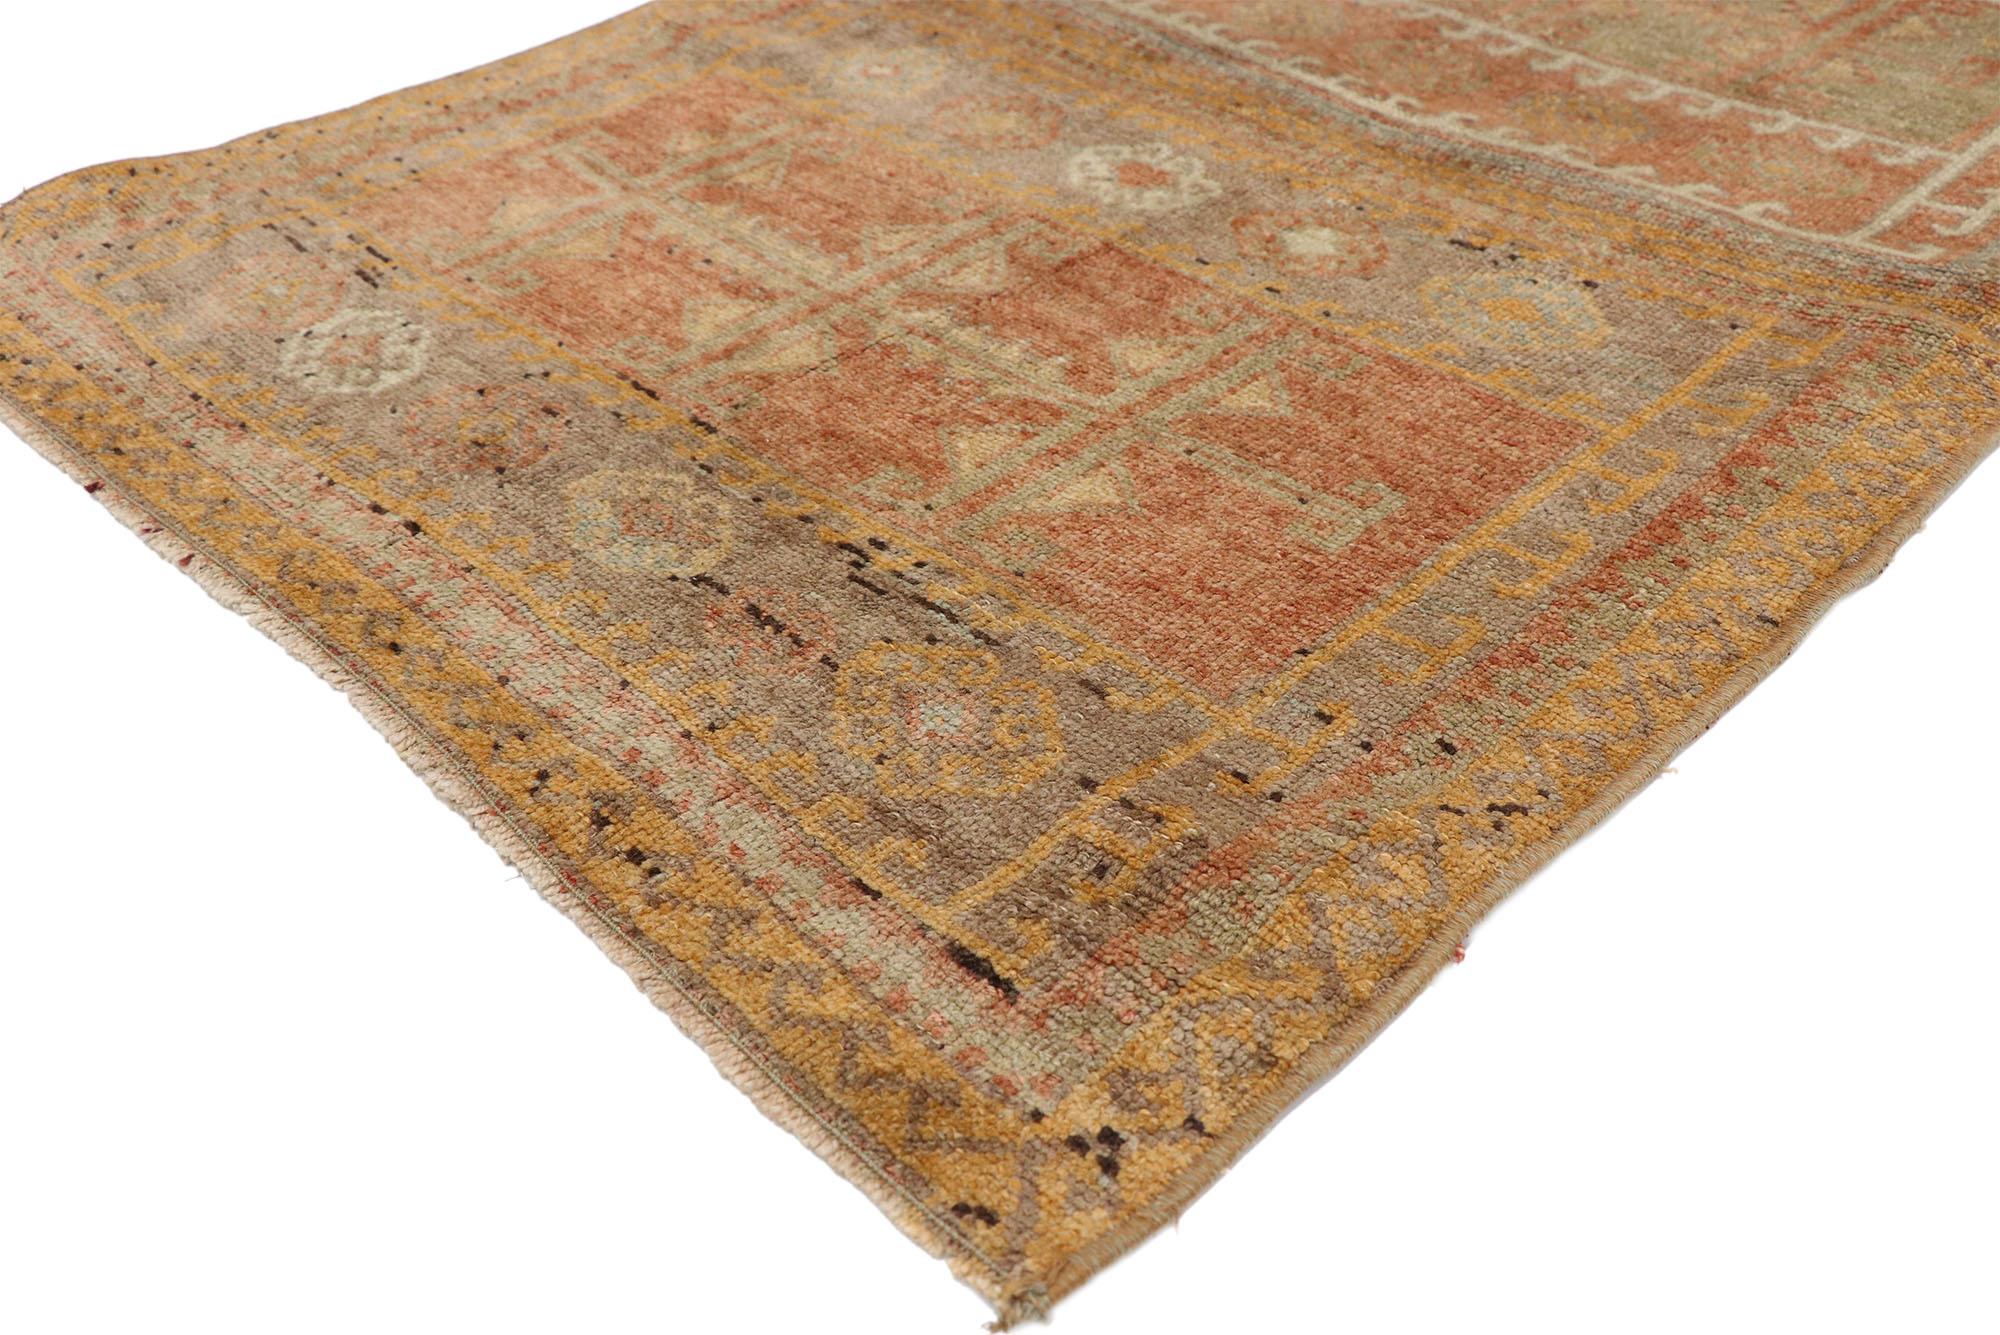 52607, antique Oushak rug with Belgian Arts & Crafts style. Highlighting modern design aesthetics and understated elegance with subdued color, this hand knotted wool antique Turkish Oushak rug beautifully embodies rustic Belgian style with an Arts &